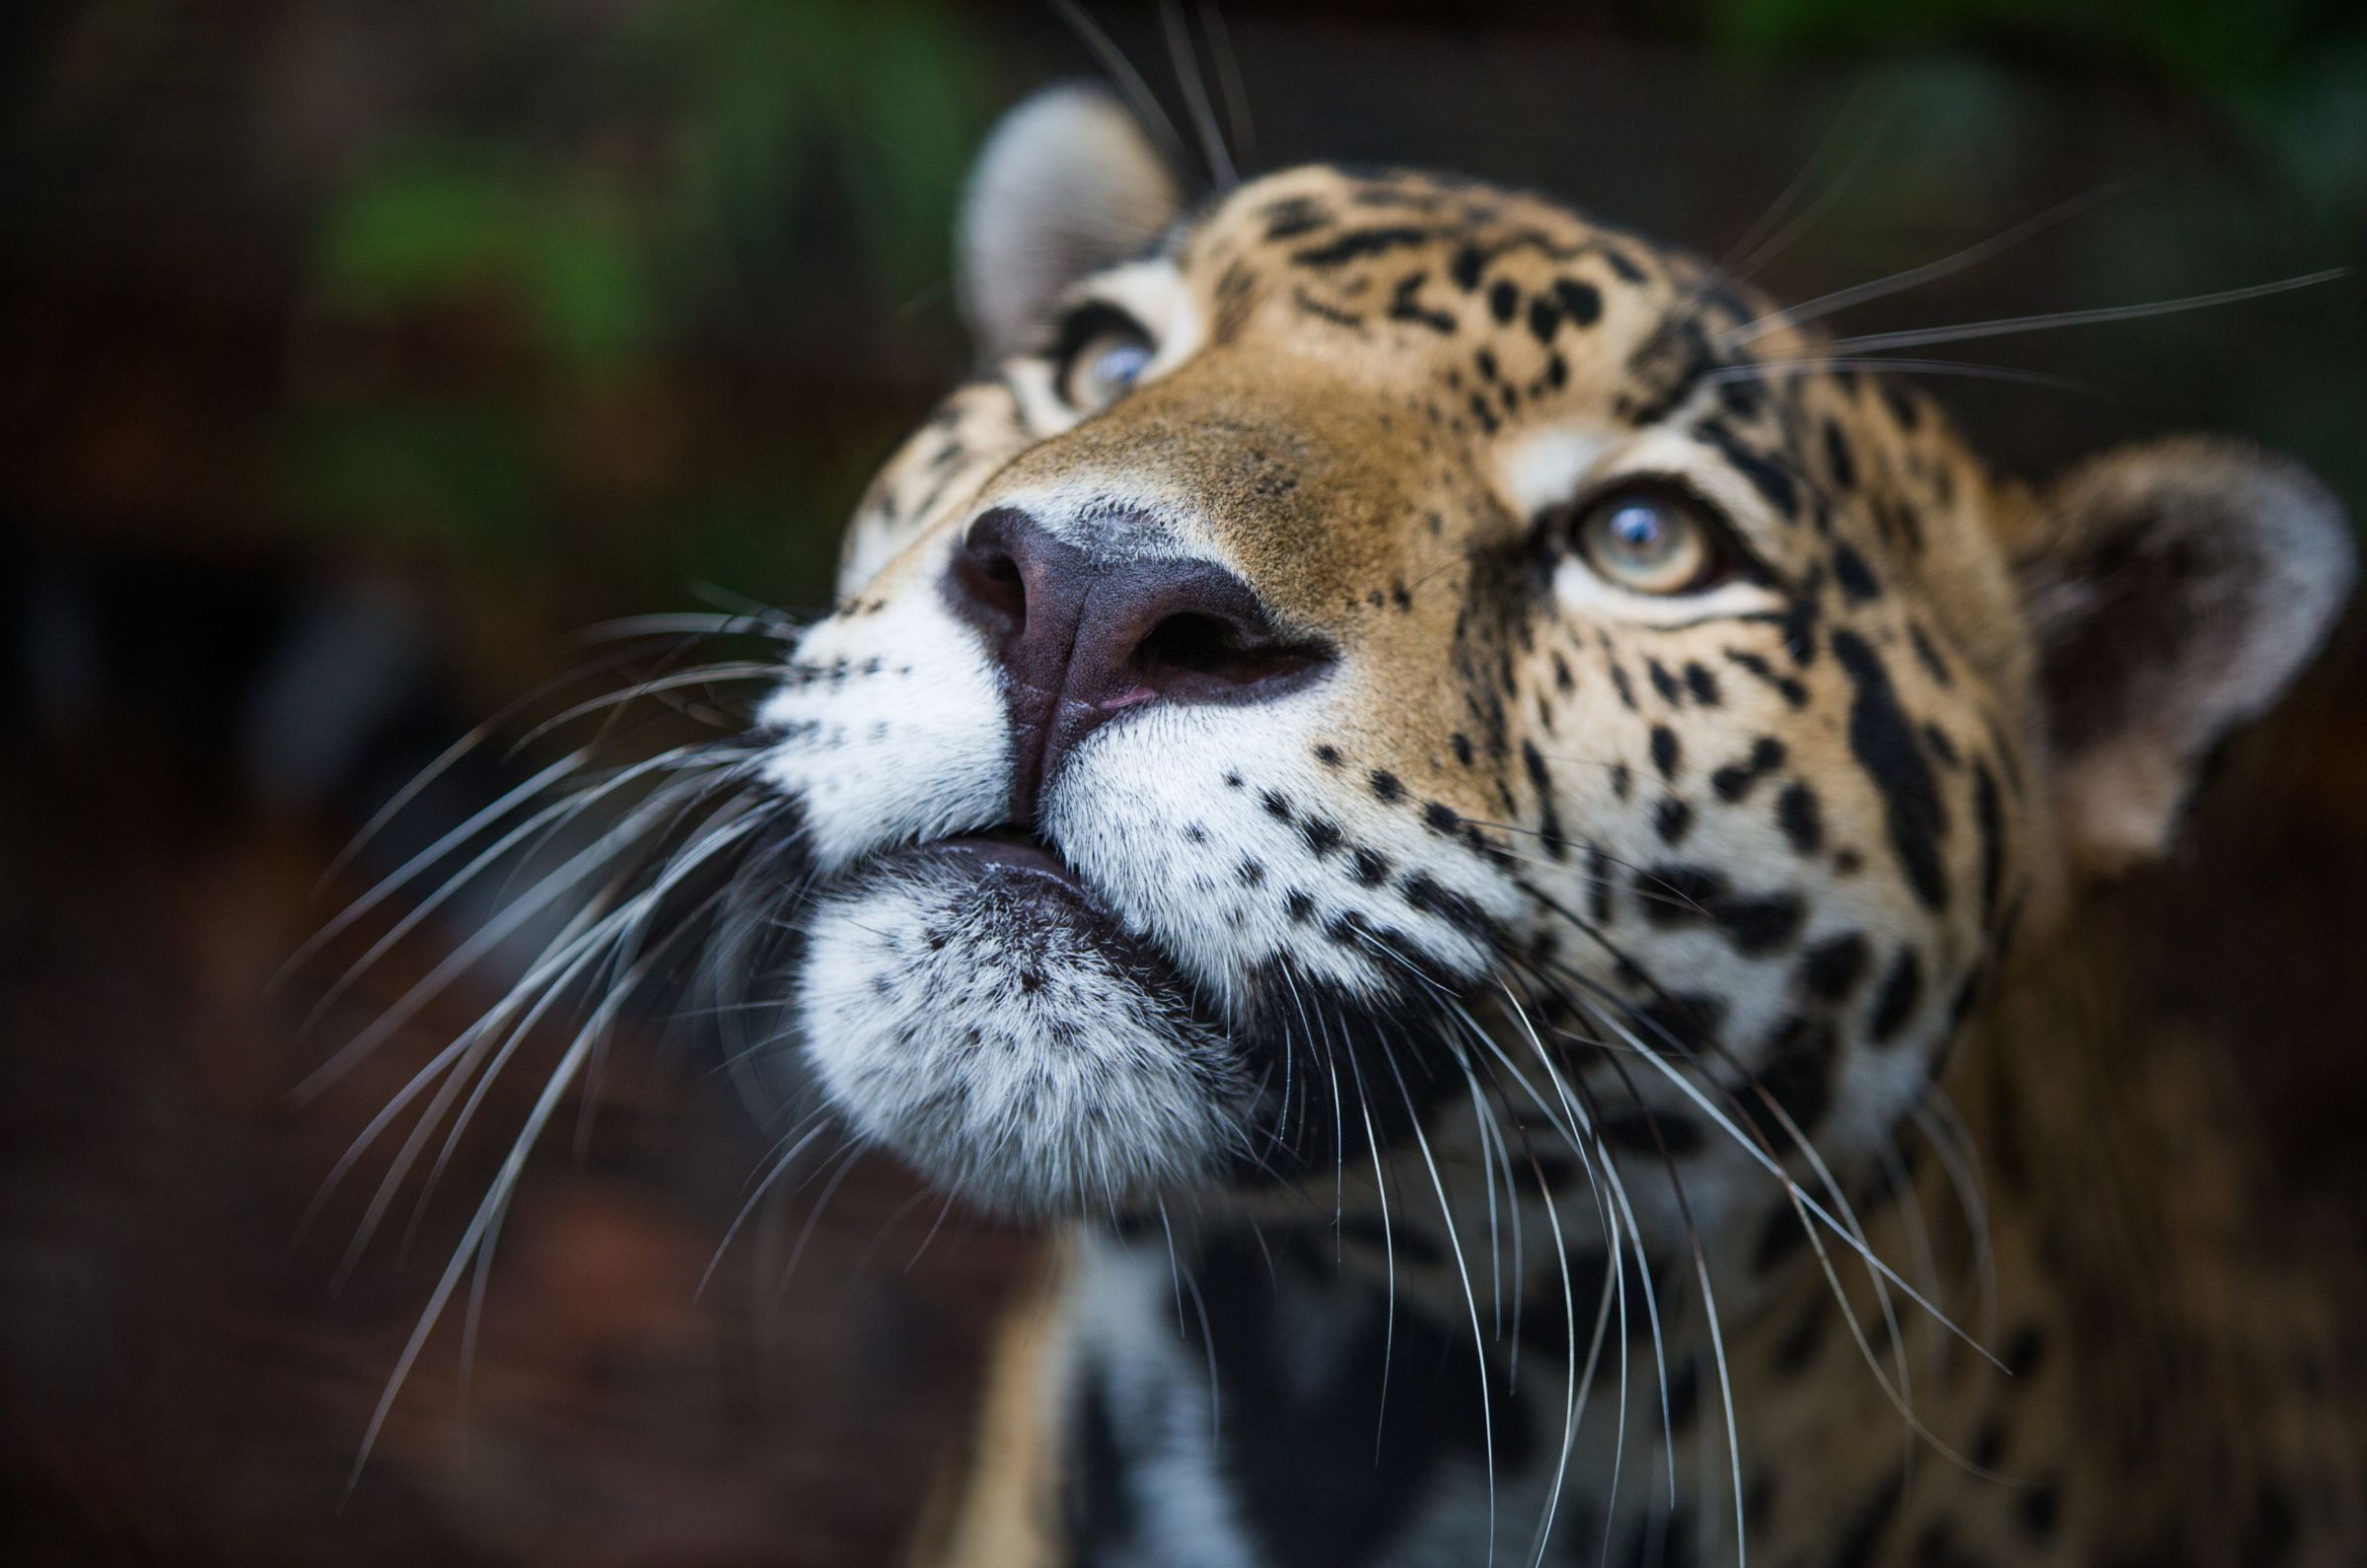 A jaguar looking up in the middle of a rainforest